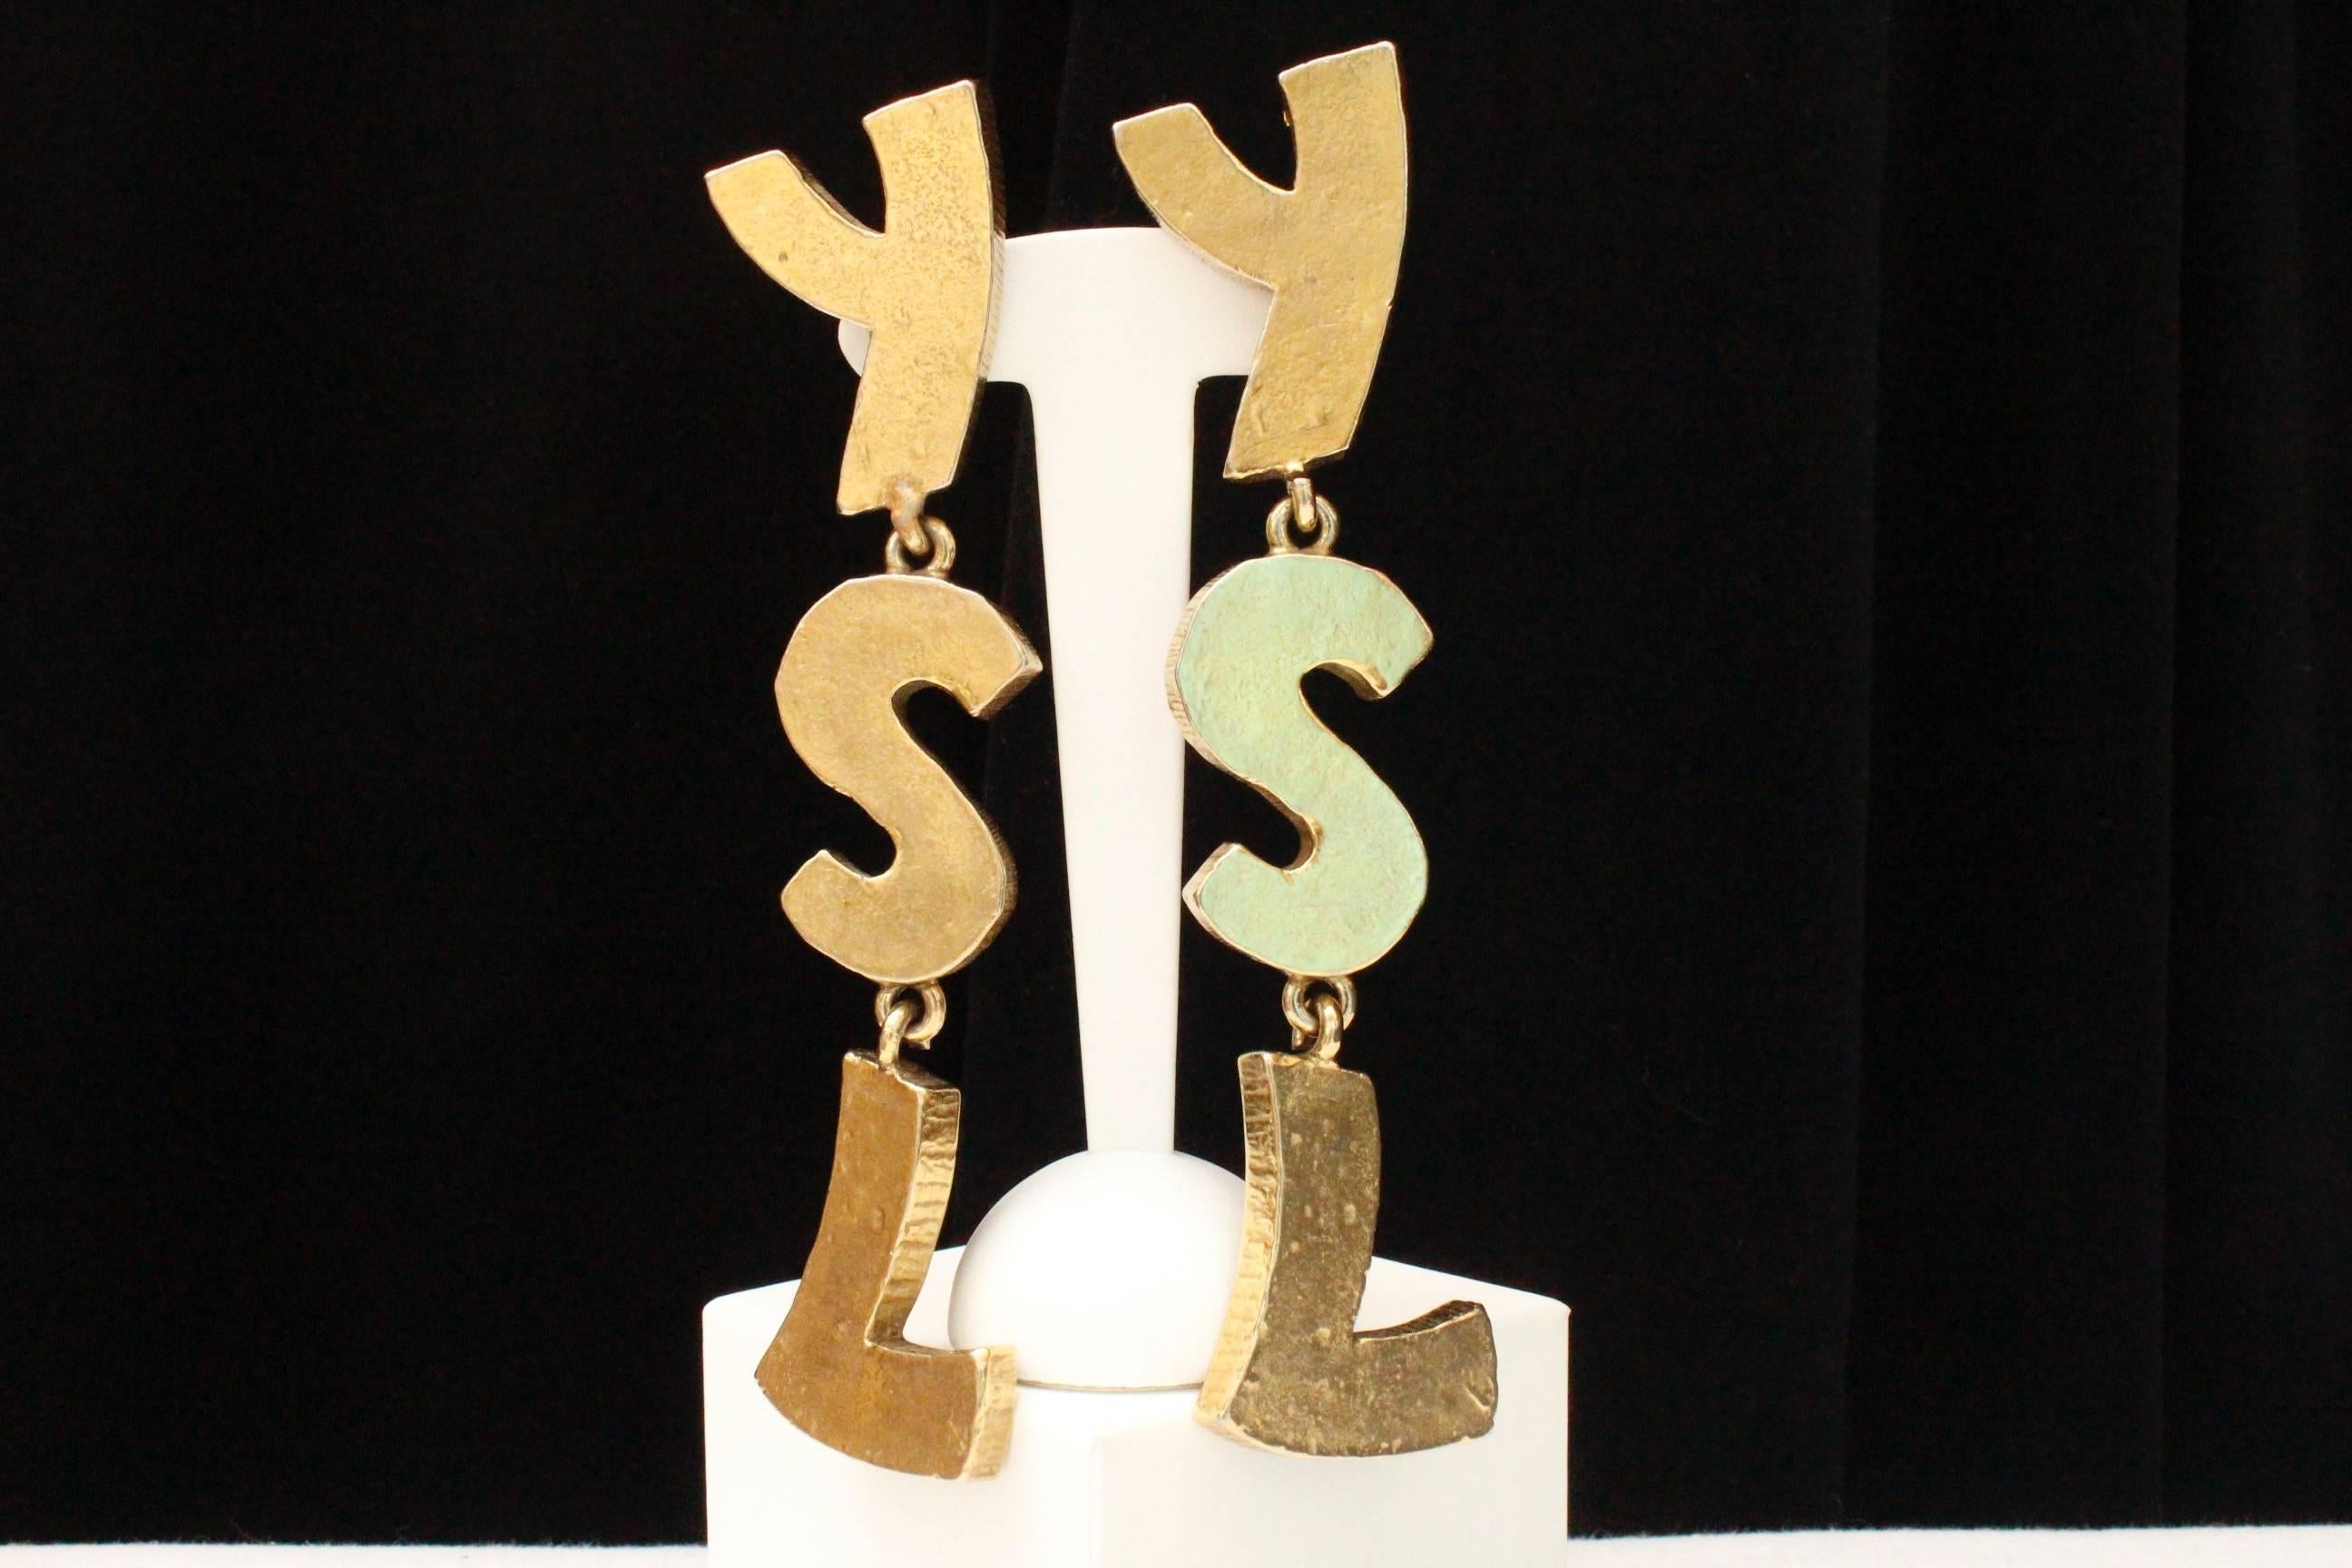 YVES SAINT LAURENT (Made in France) – Magnificent drop clip-on earrings composed of  the three oversized initials YSL linked together, made of hammered hollow gilded metal.  Signed at back.

Iconic and spectacular piece from the 1990s.

Length 14 cm